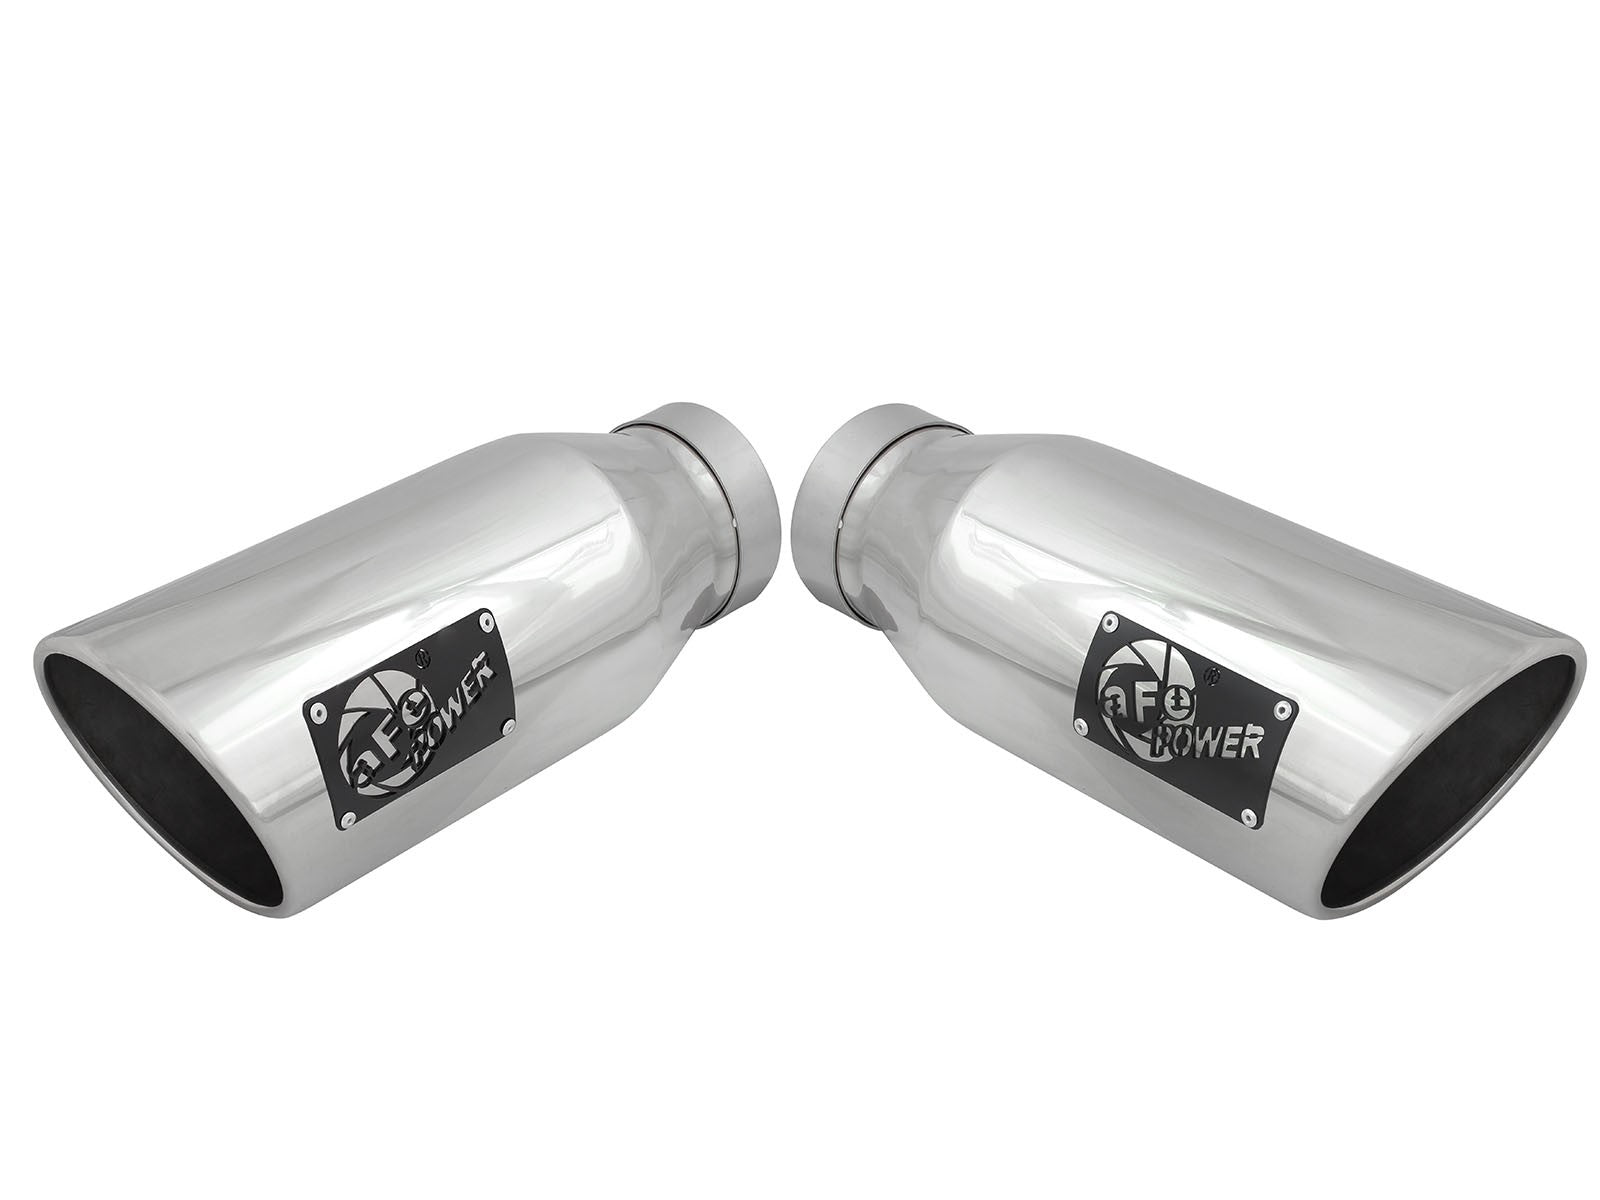 AFE Power MACH Force-Xp 4" Polished Stainless Steel Exhaust Tip Set - Northwest Diesel